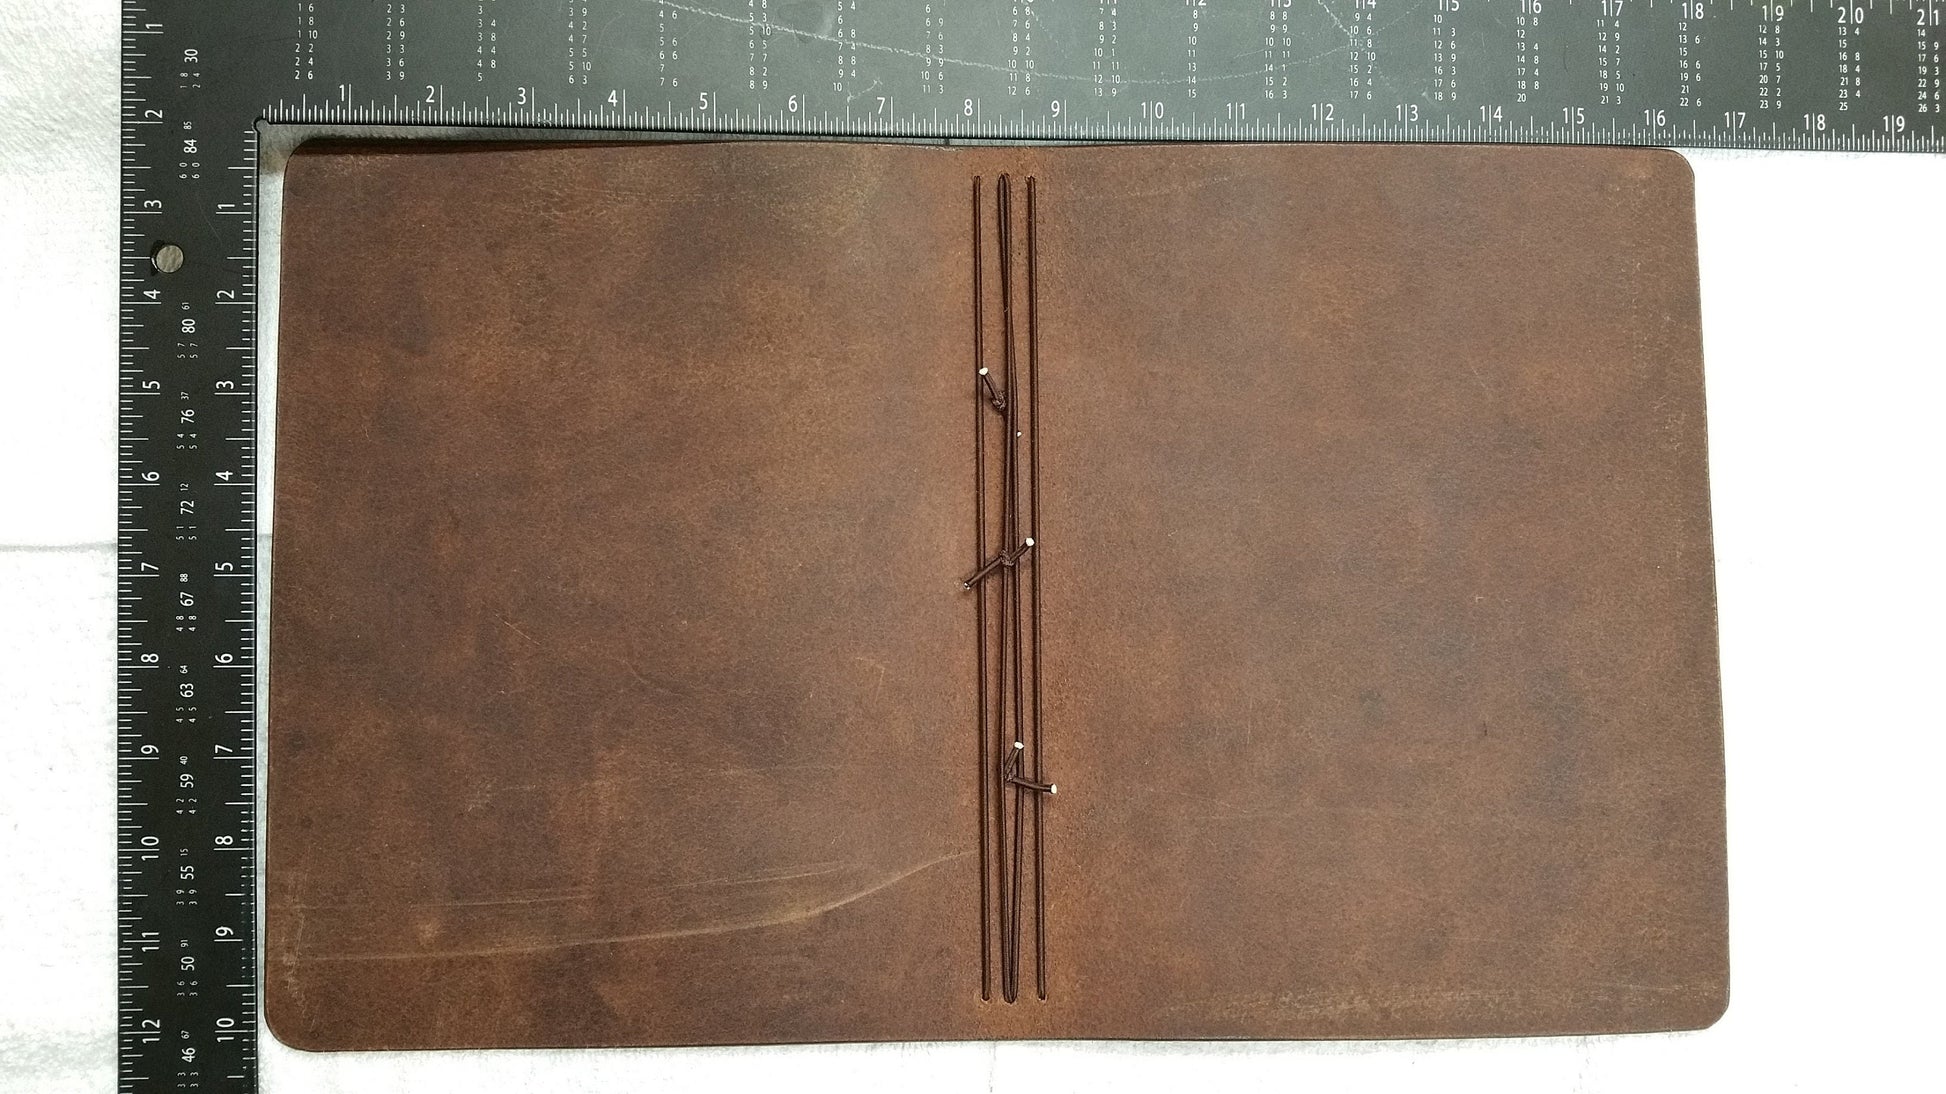 BIG Walnut Bridle Composition Cover | Full Grain Leather Journal | Fits 7.5" × 9.75" inserts